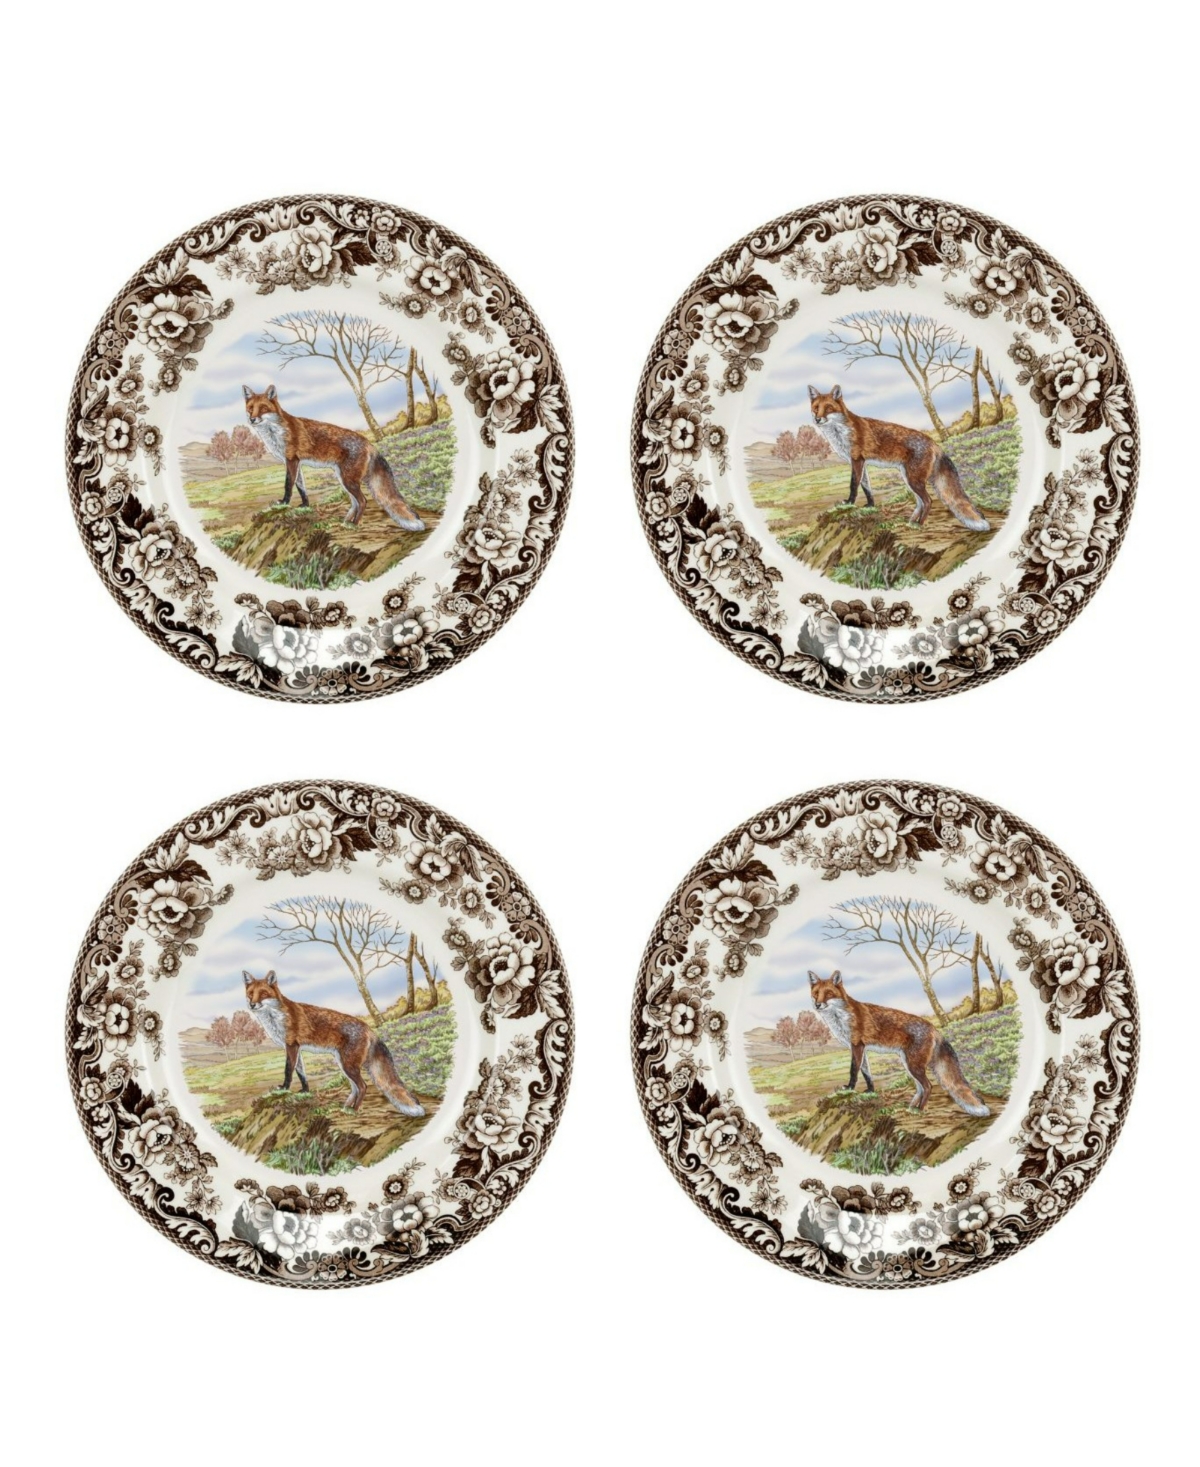 Woodland Red Fox 4 Piece Dinner Plates, Service for 4 - Brown